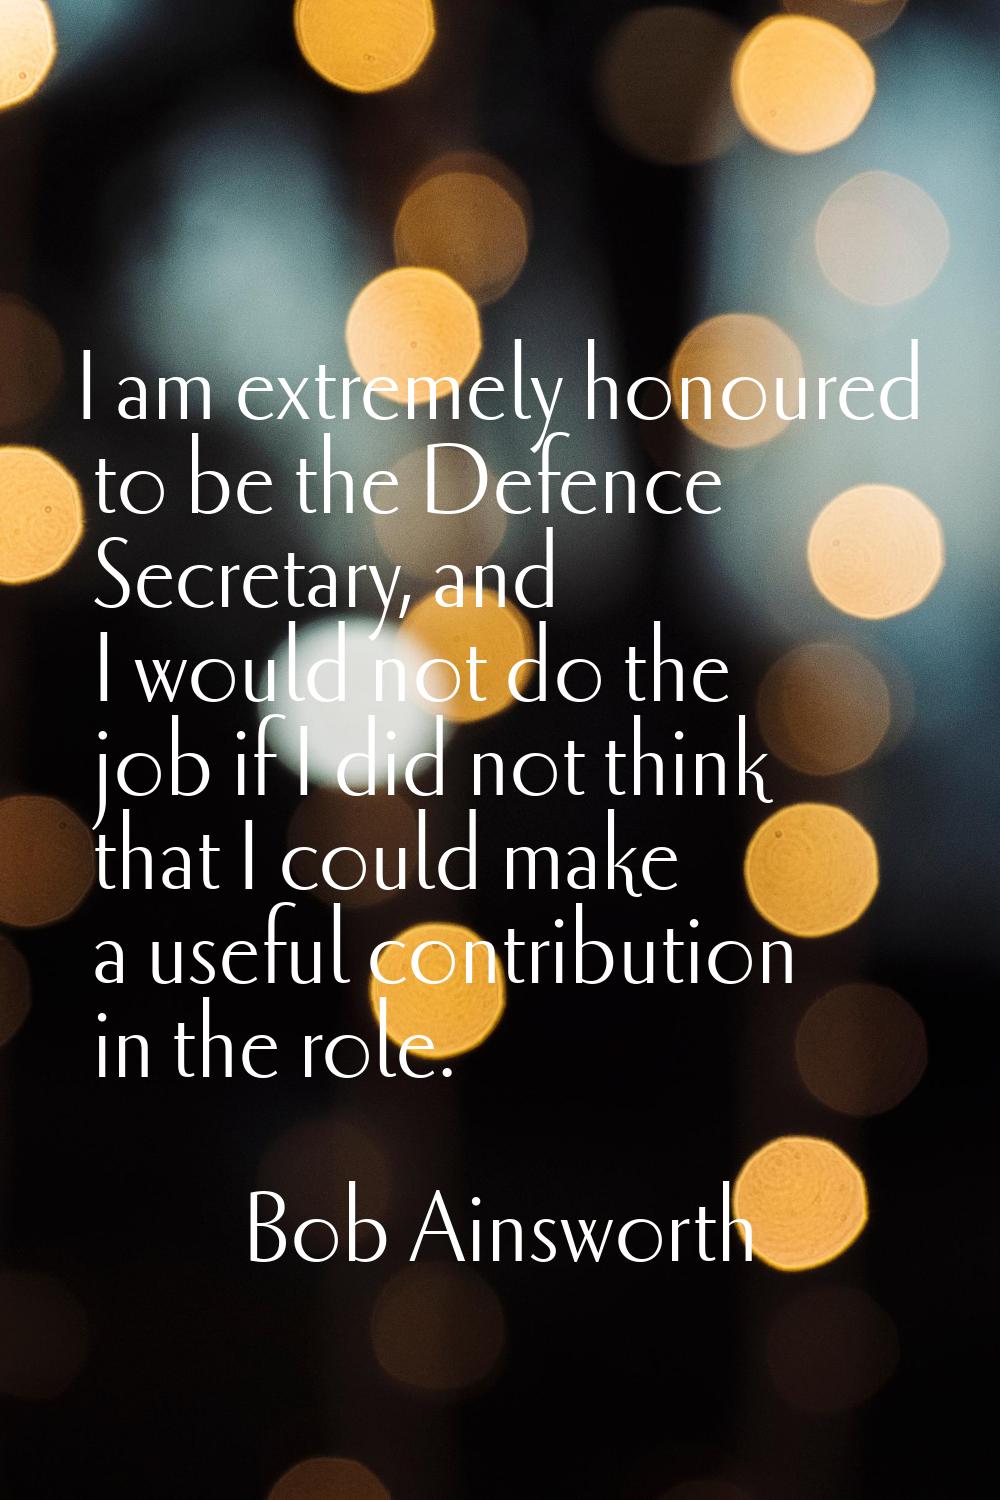 I am extremely honoured to be the Defence Secretary, and I would not do the job if I did not think 